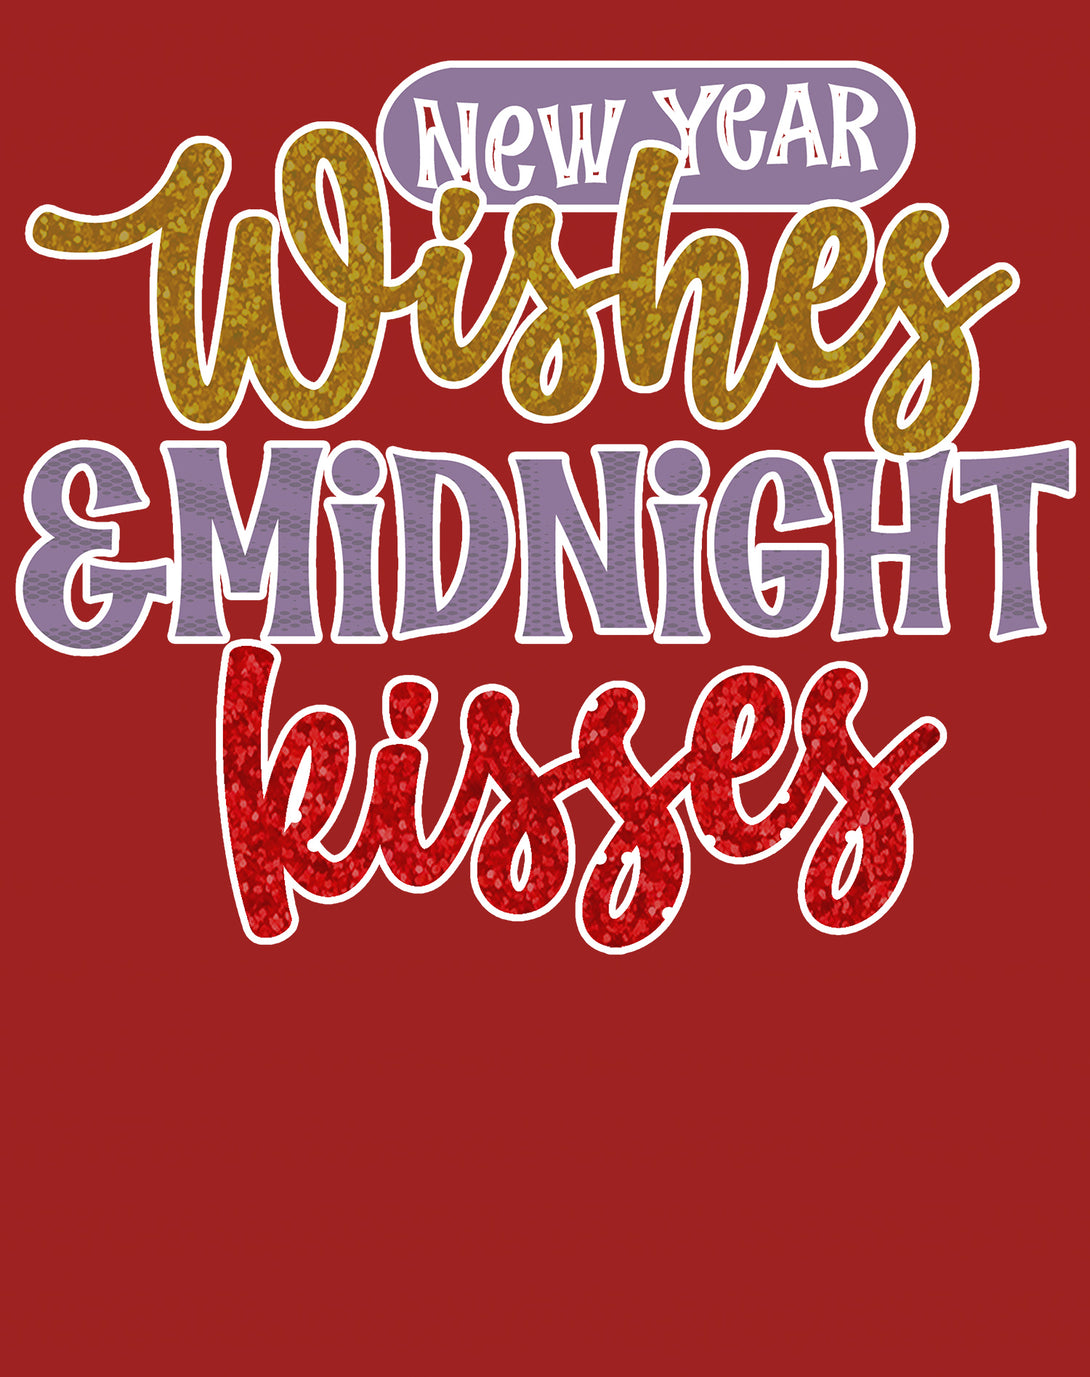 NYE New Year Wishes Midnight Kisses Eve Party Cute Couples Women's T-Shirt Red - Urban Species Design Close Up